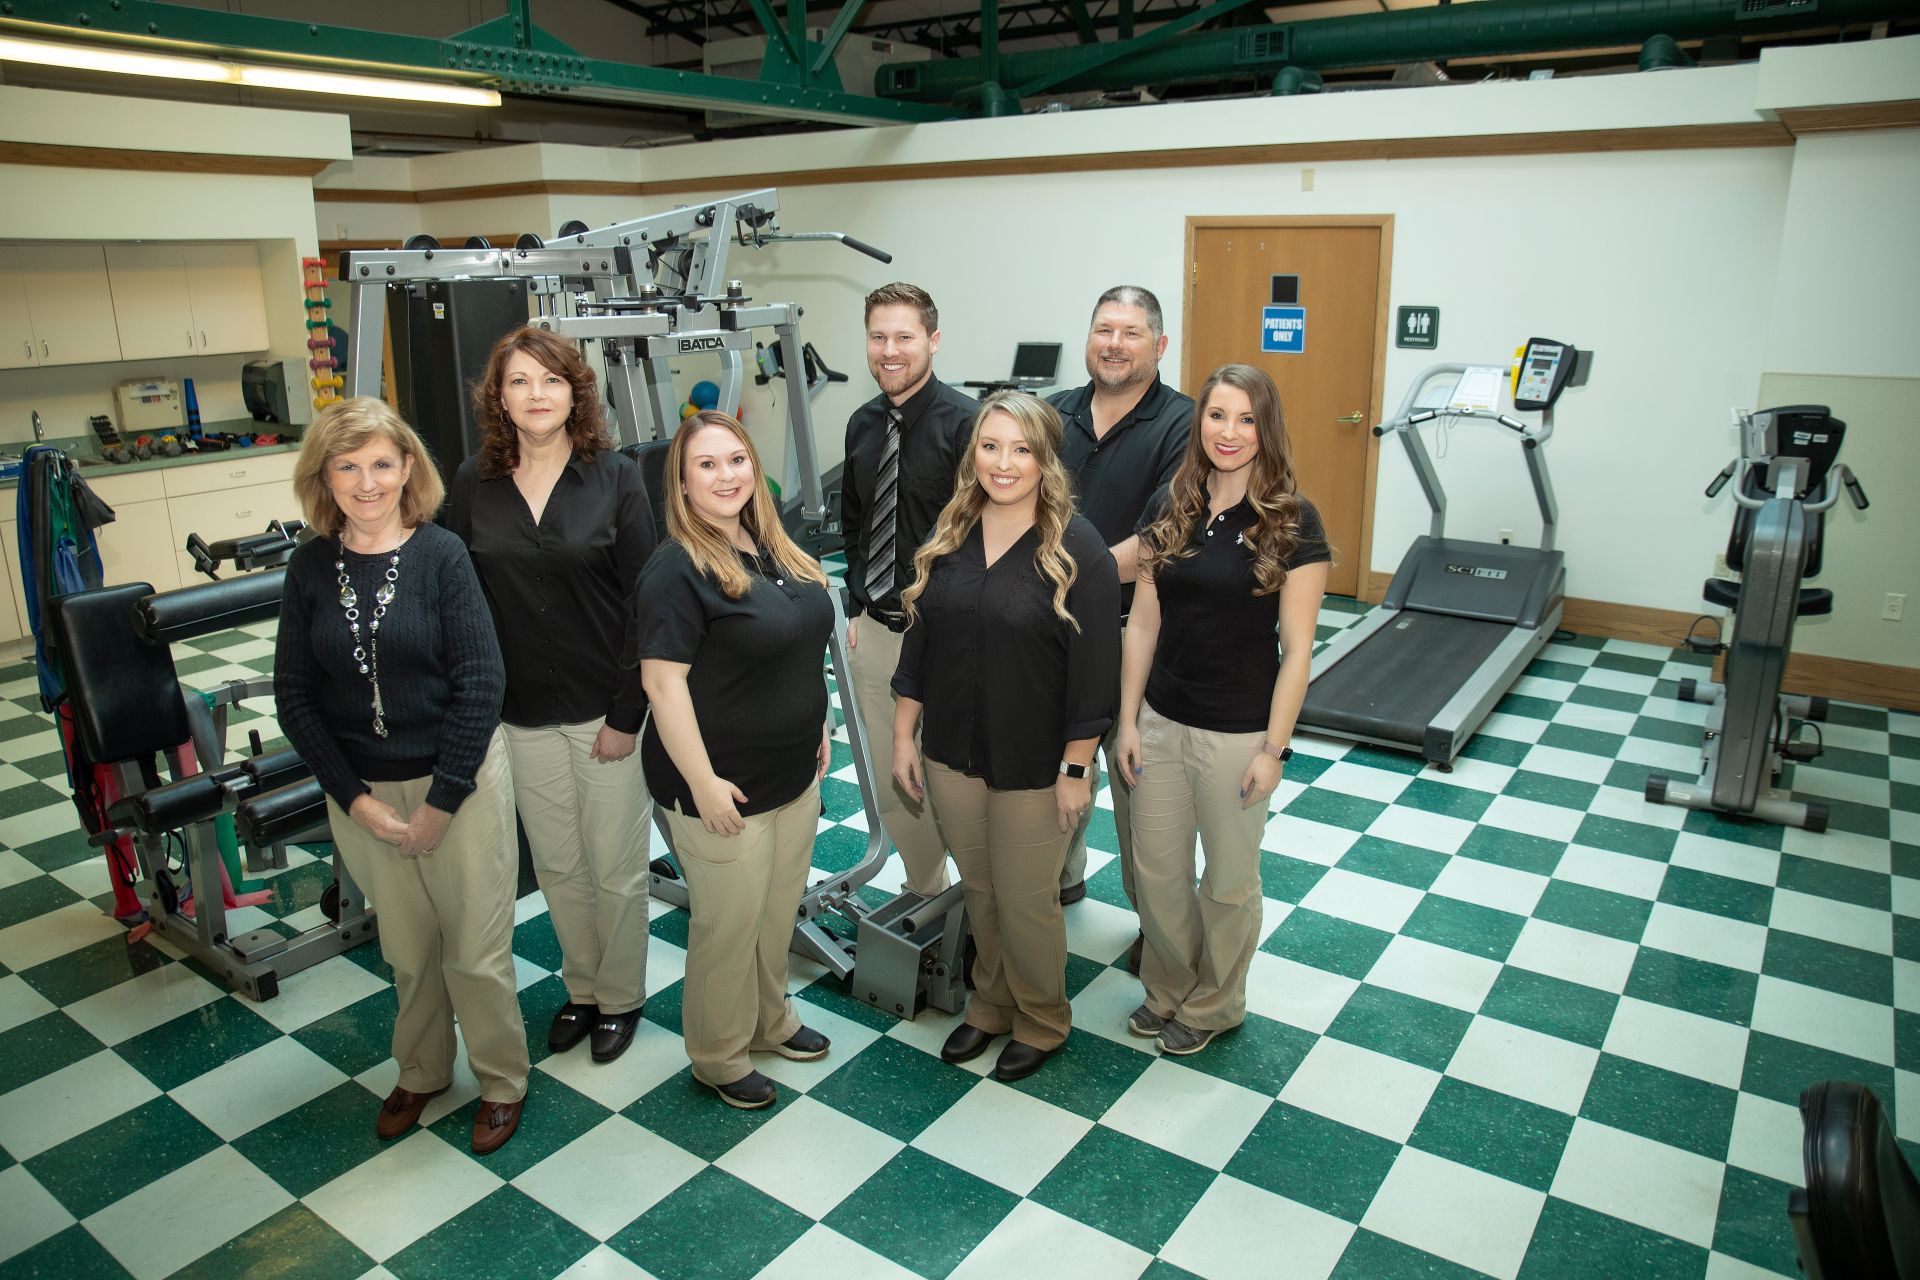 Pictured left to right: Sheila Eplin, Receptionist, Jeanette Toler, PTA, Alicia Clark, SLP, Jacob Jackson, DPT, Emily Cook, DPT, Andrew Toler, Director of Outpatient Rehab, and Krysta Kemp, OT. 